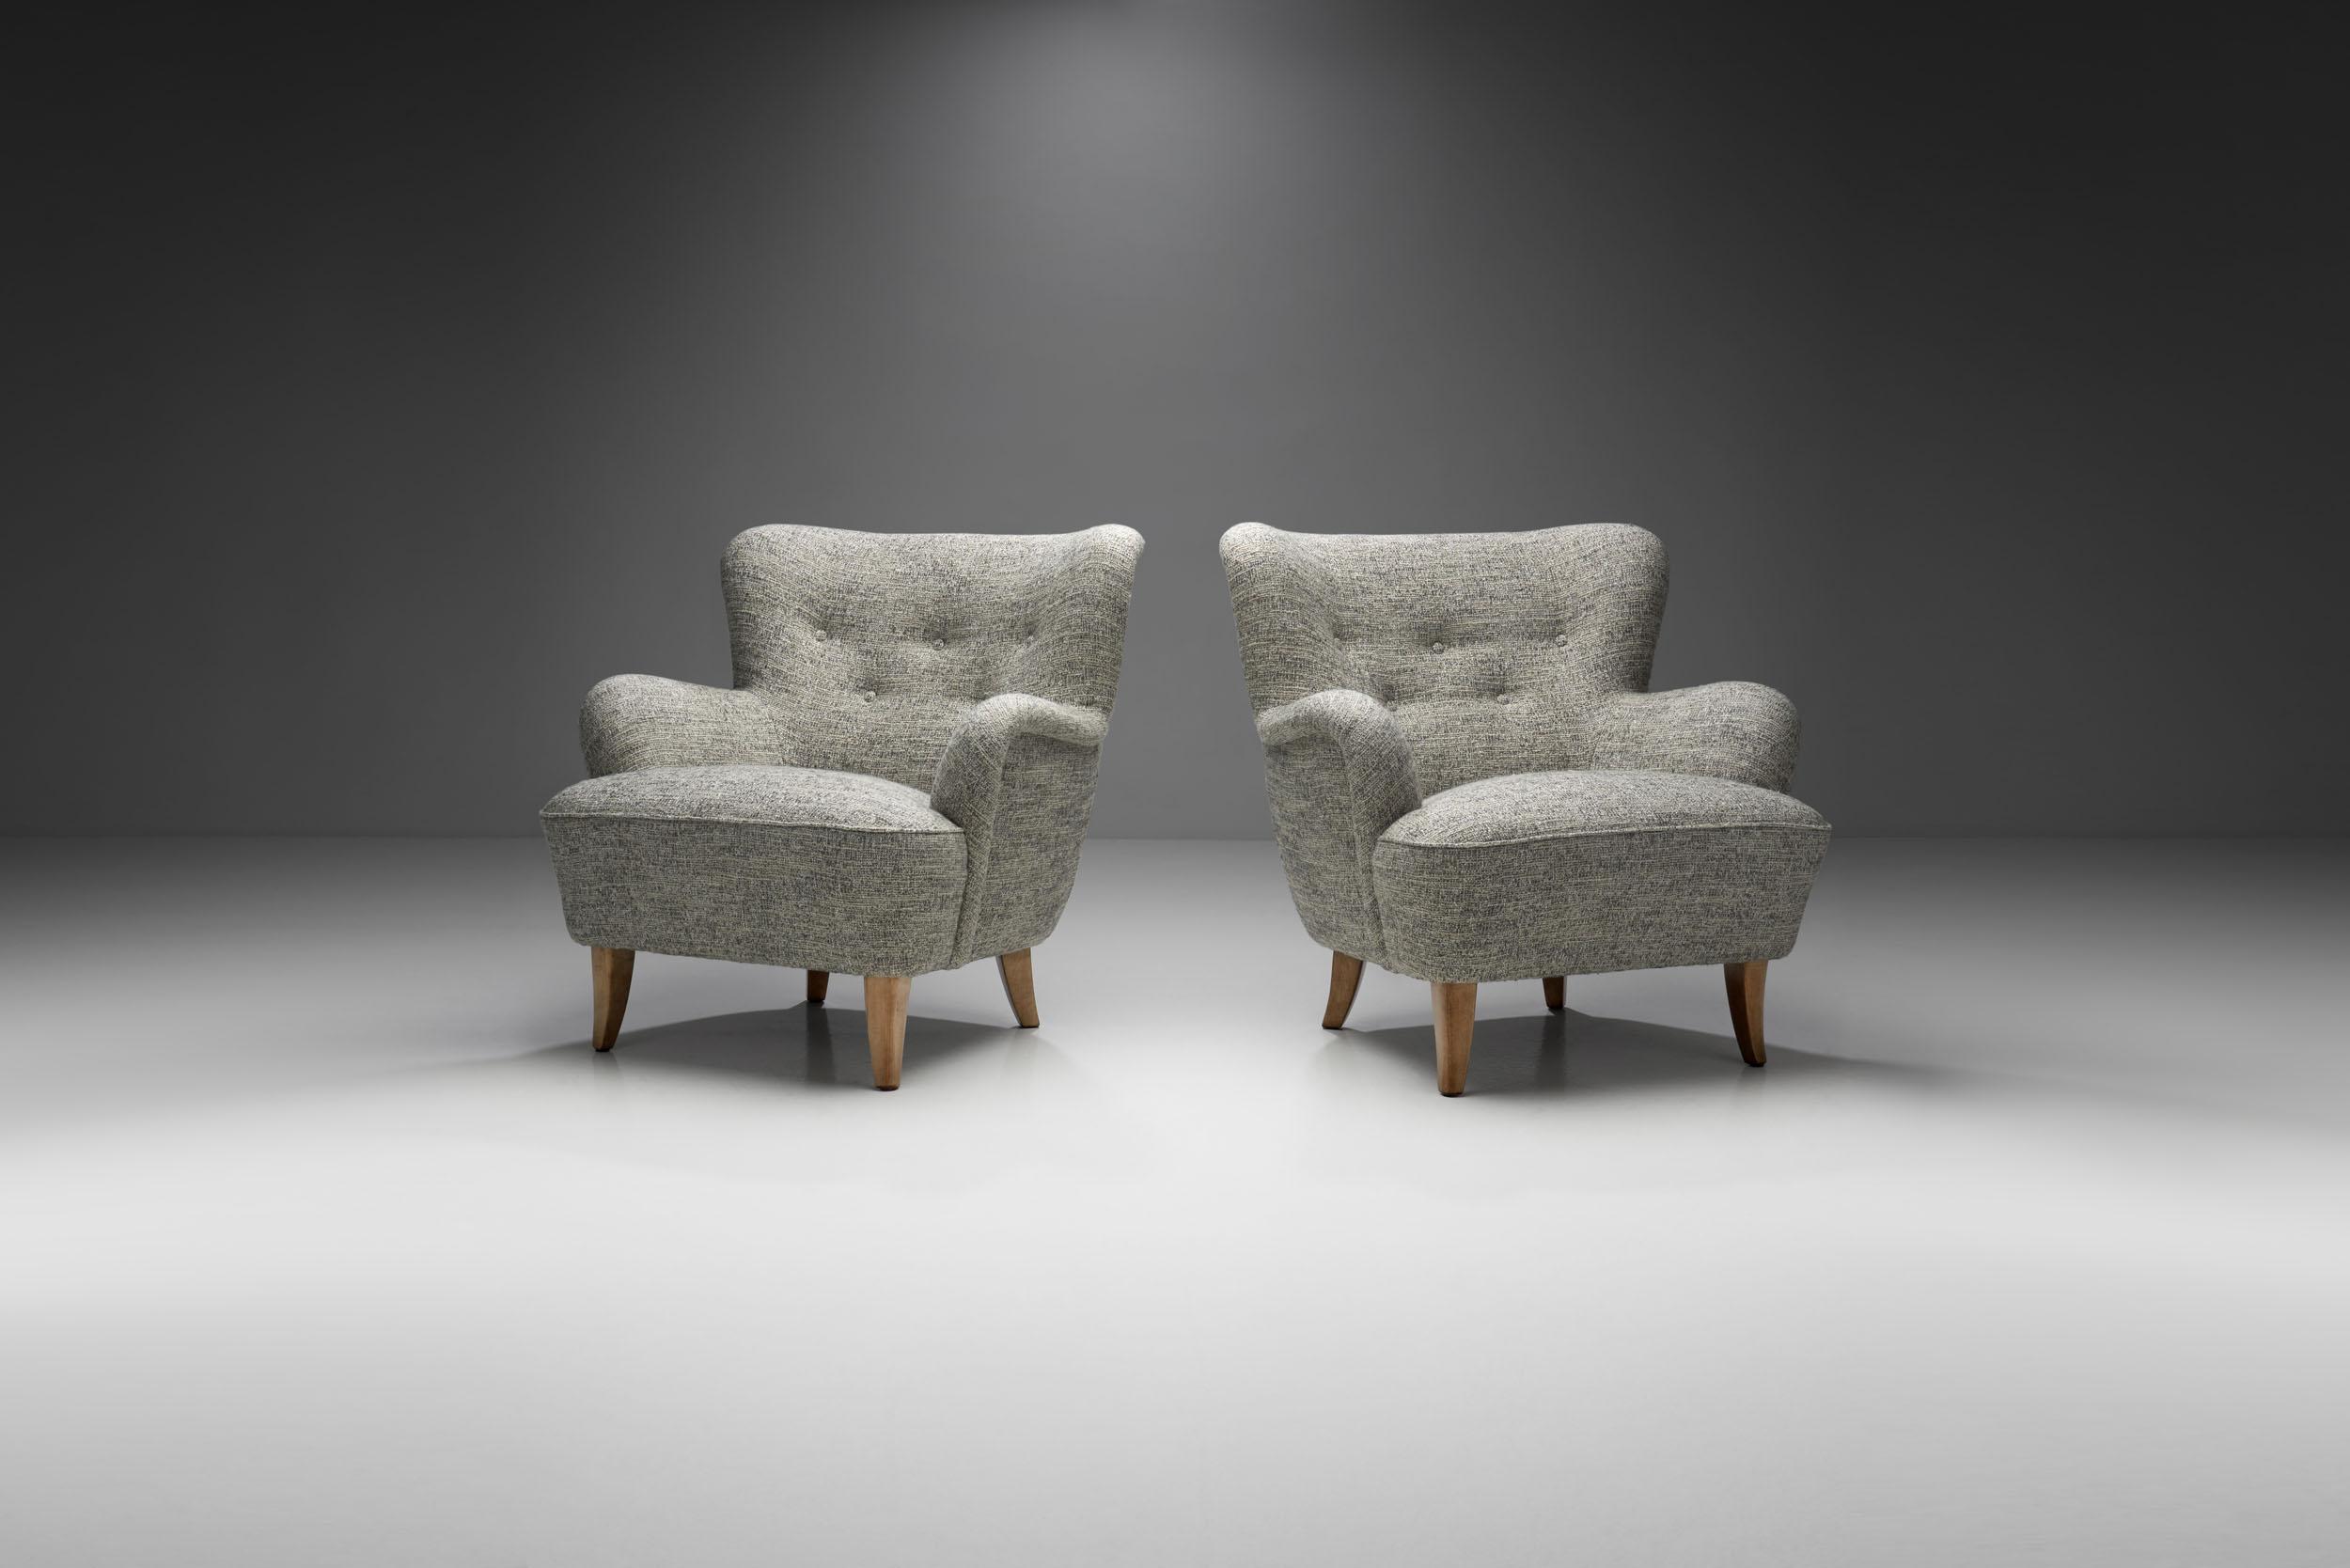 Finnish Pair of “Laila” Armchairs by Ilmari Lappalainen for Asko, Finland, 1948 For Sale